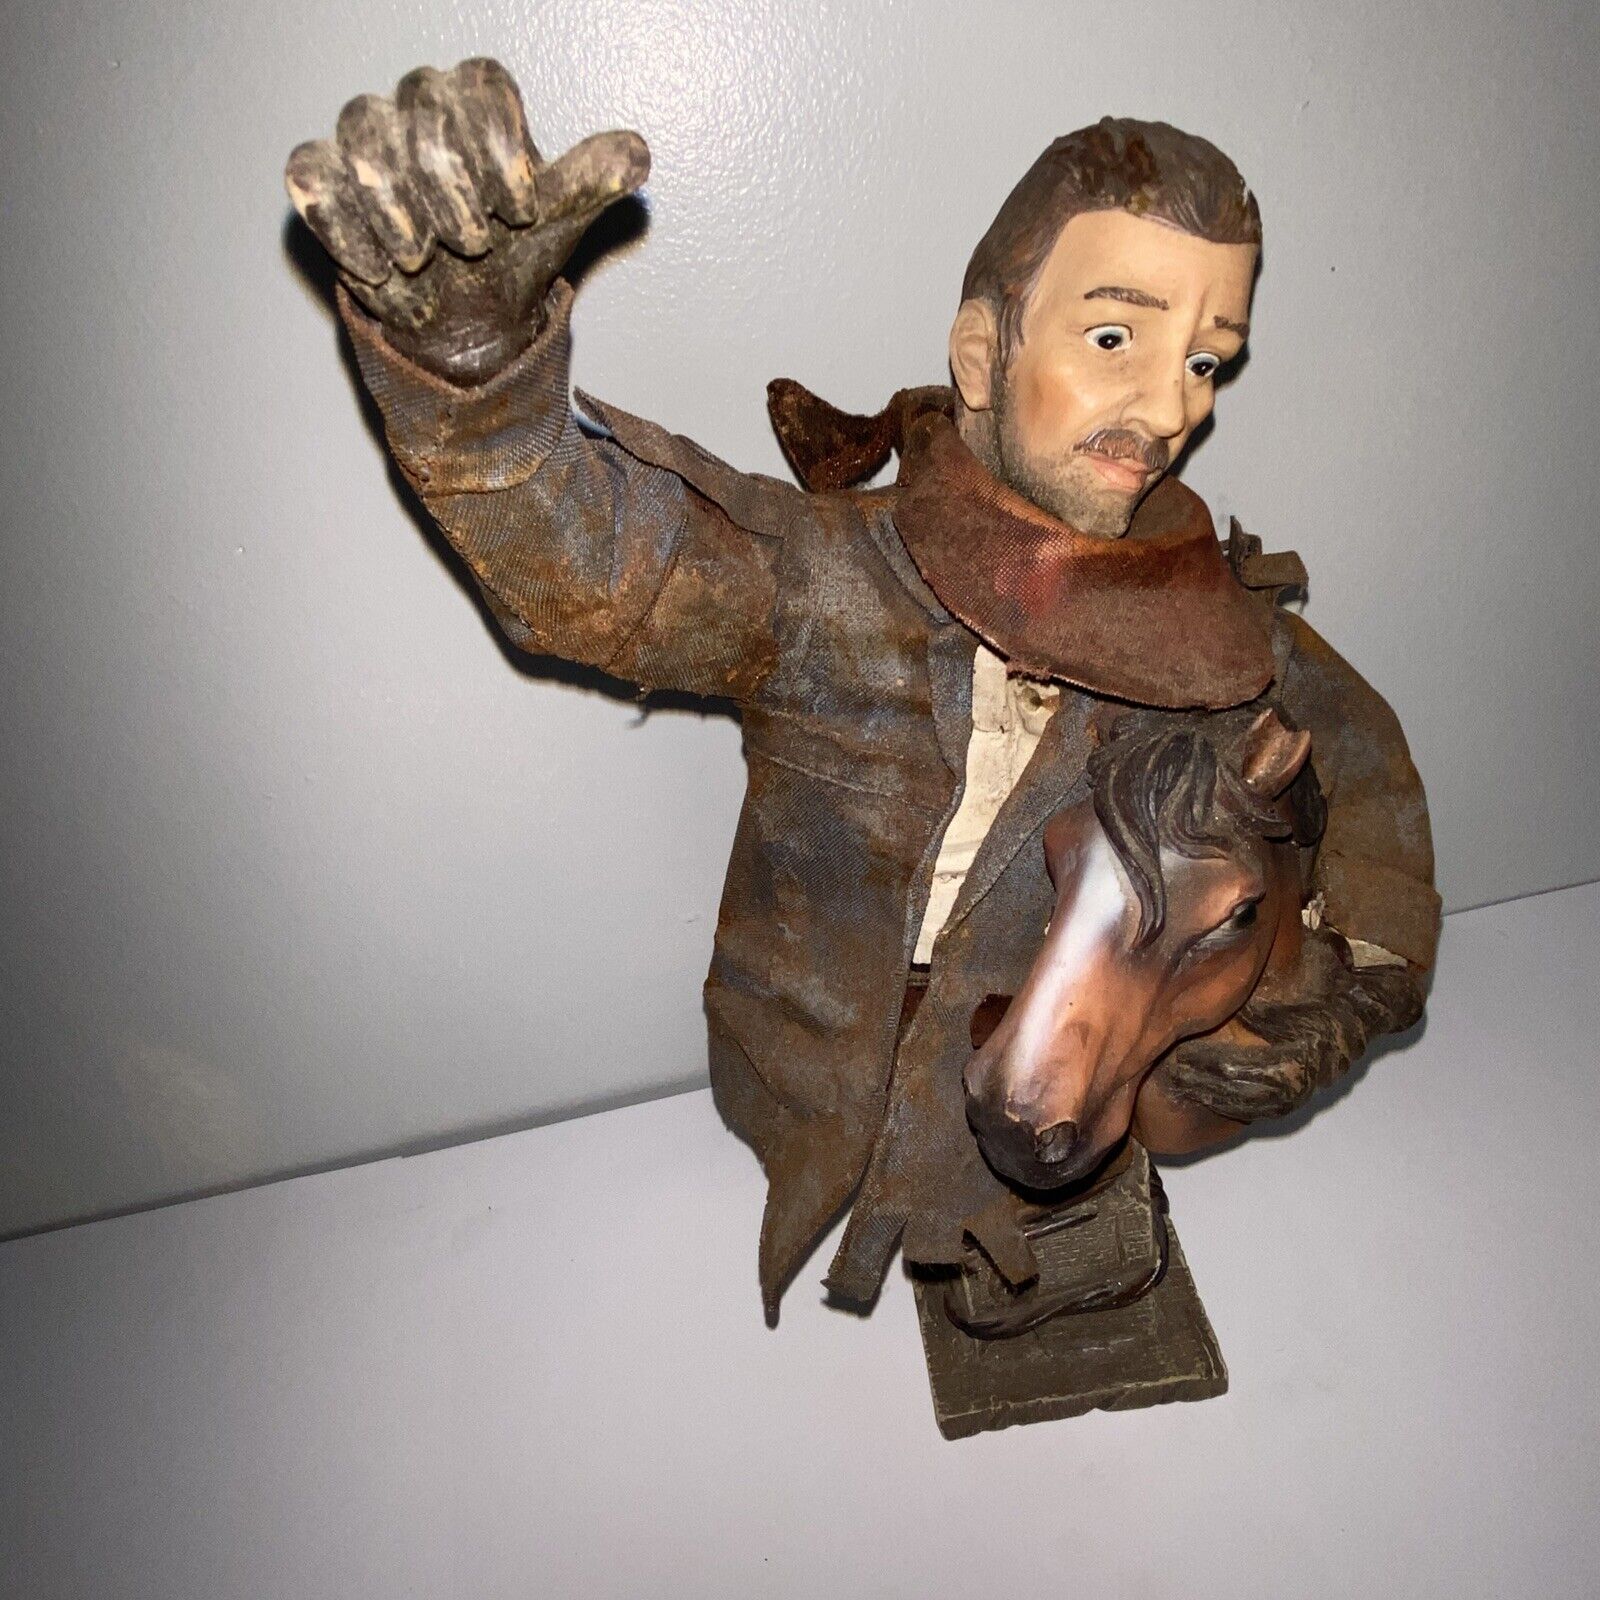 Maybe a Walking Dead Rick Grimes  13” Resin Statue ?? Holding Horse Realism ?